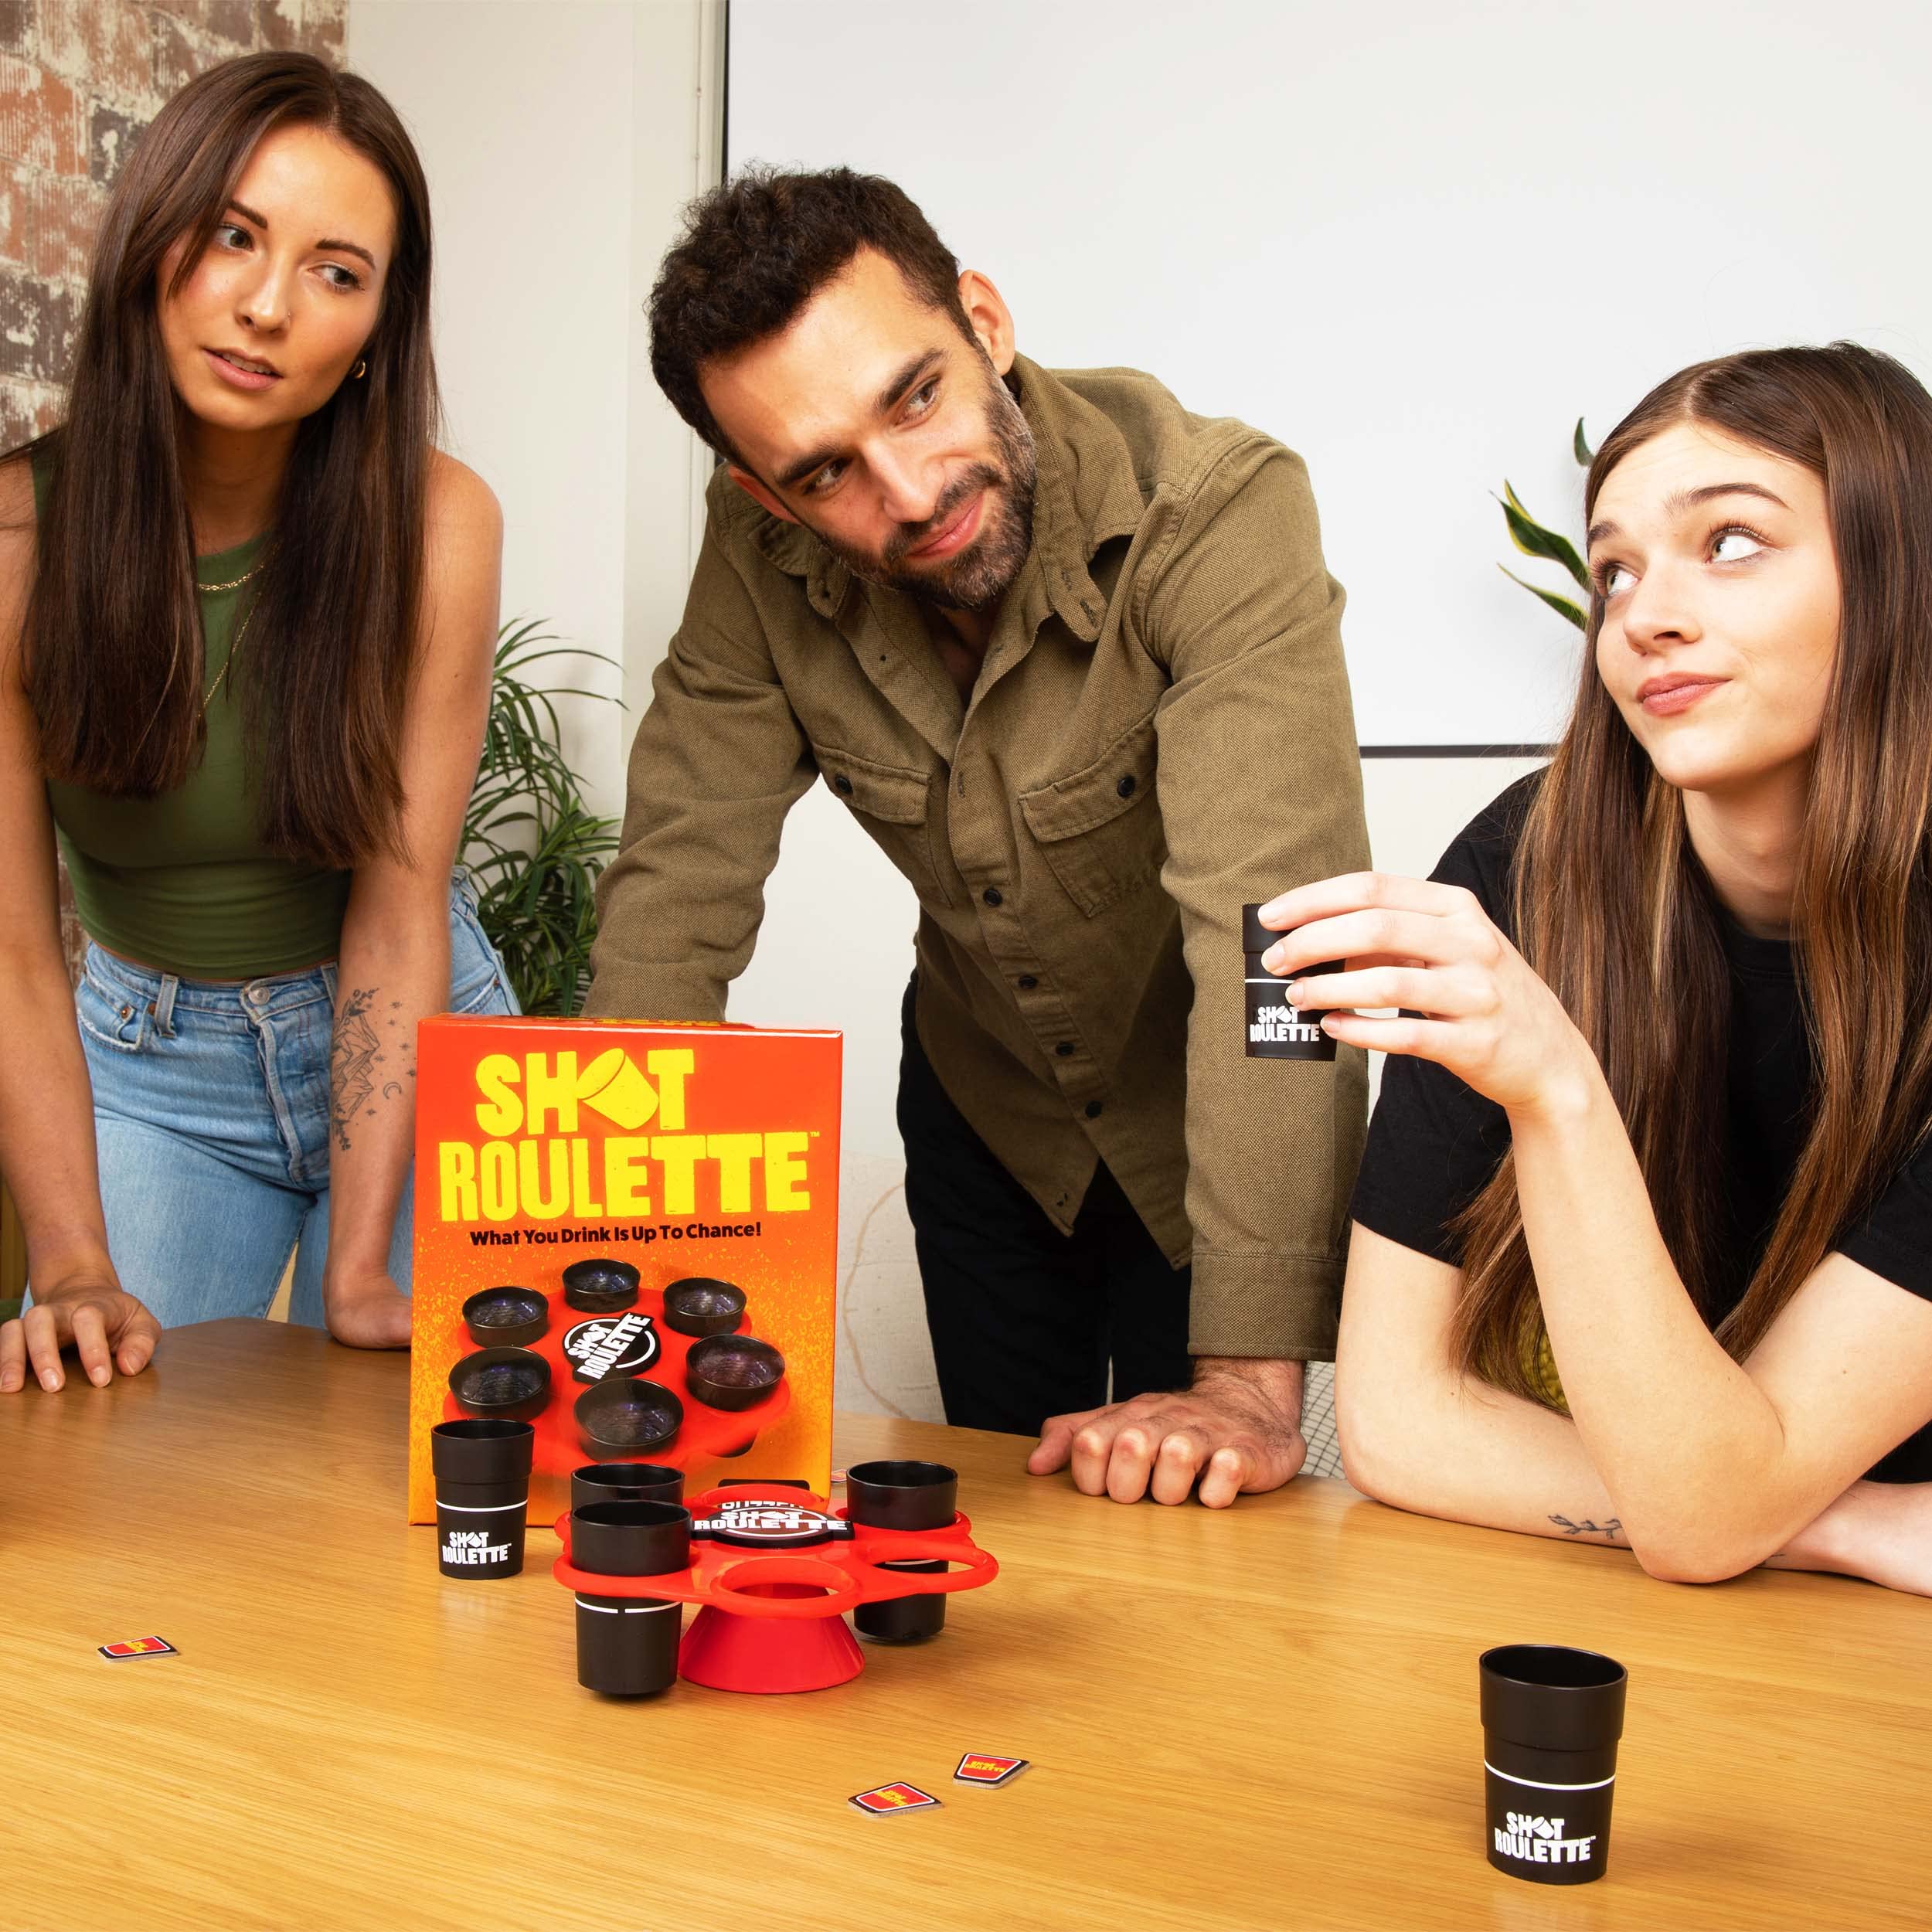 WHAT DO YOU MEME? Shot Roulette: The Roulette Wheel Drinking Game from The Creators of Buzzed - House Party Games for Adults